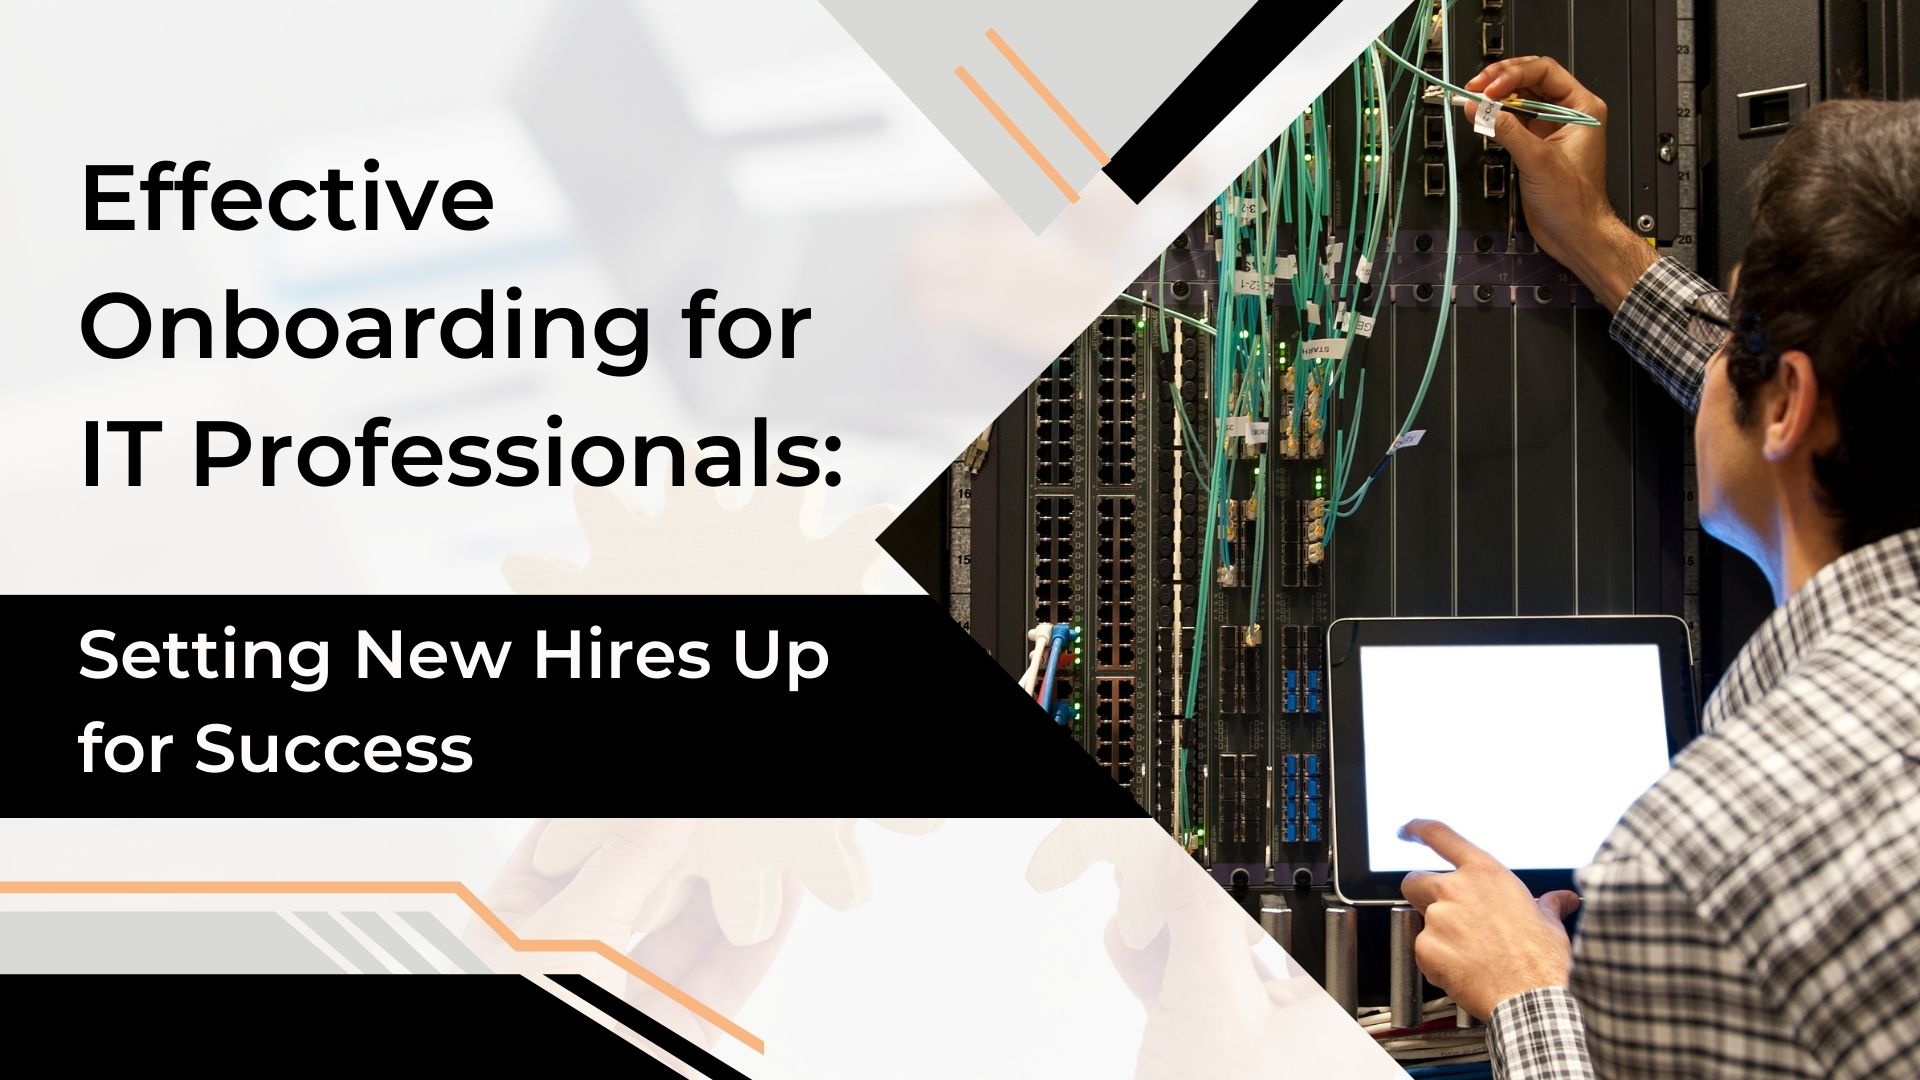 Effective Onboarding for IT Professionals: Setting New Hires Up for Success